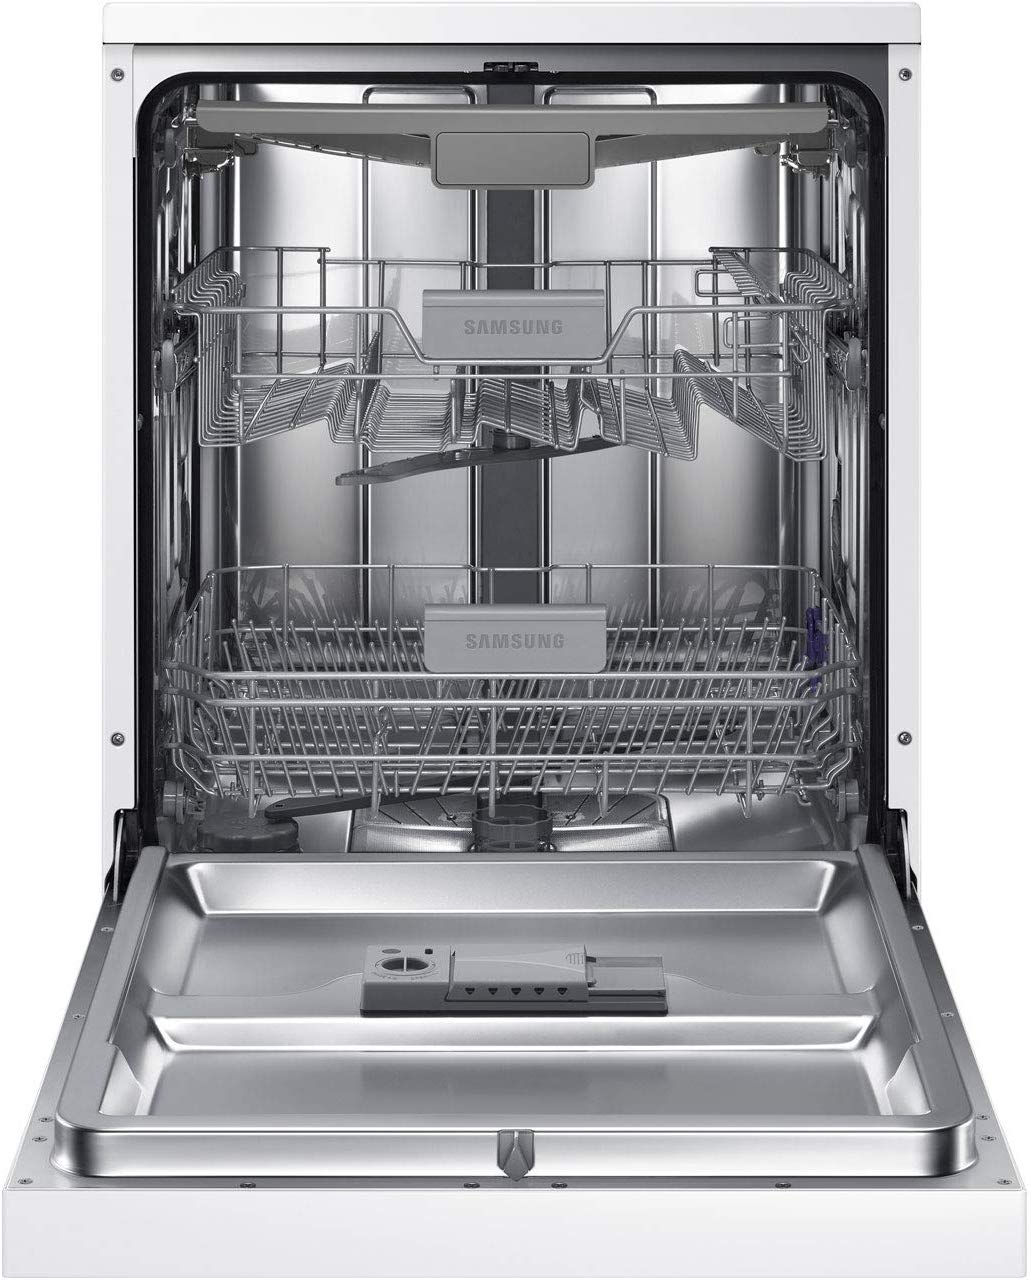 Samsung DW60M6050FW (White), Dishwashers Reviews and Comments